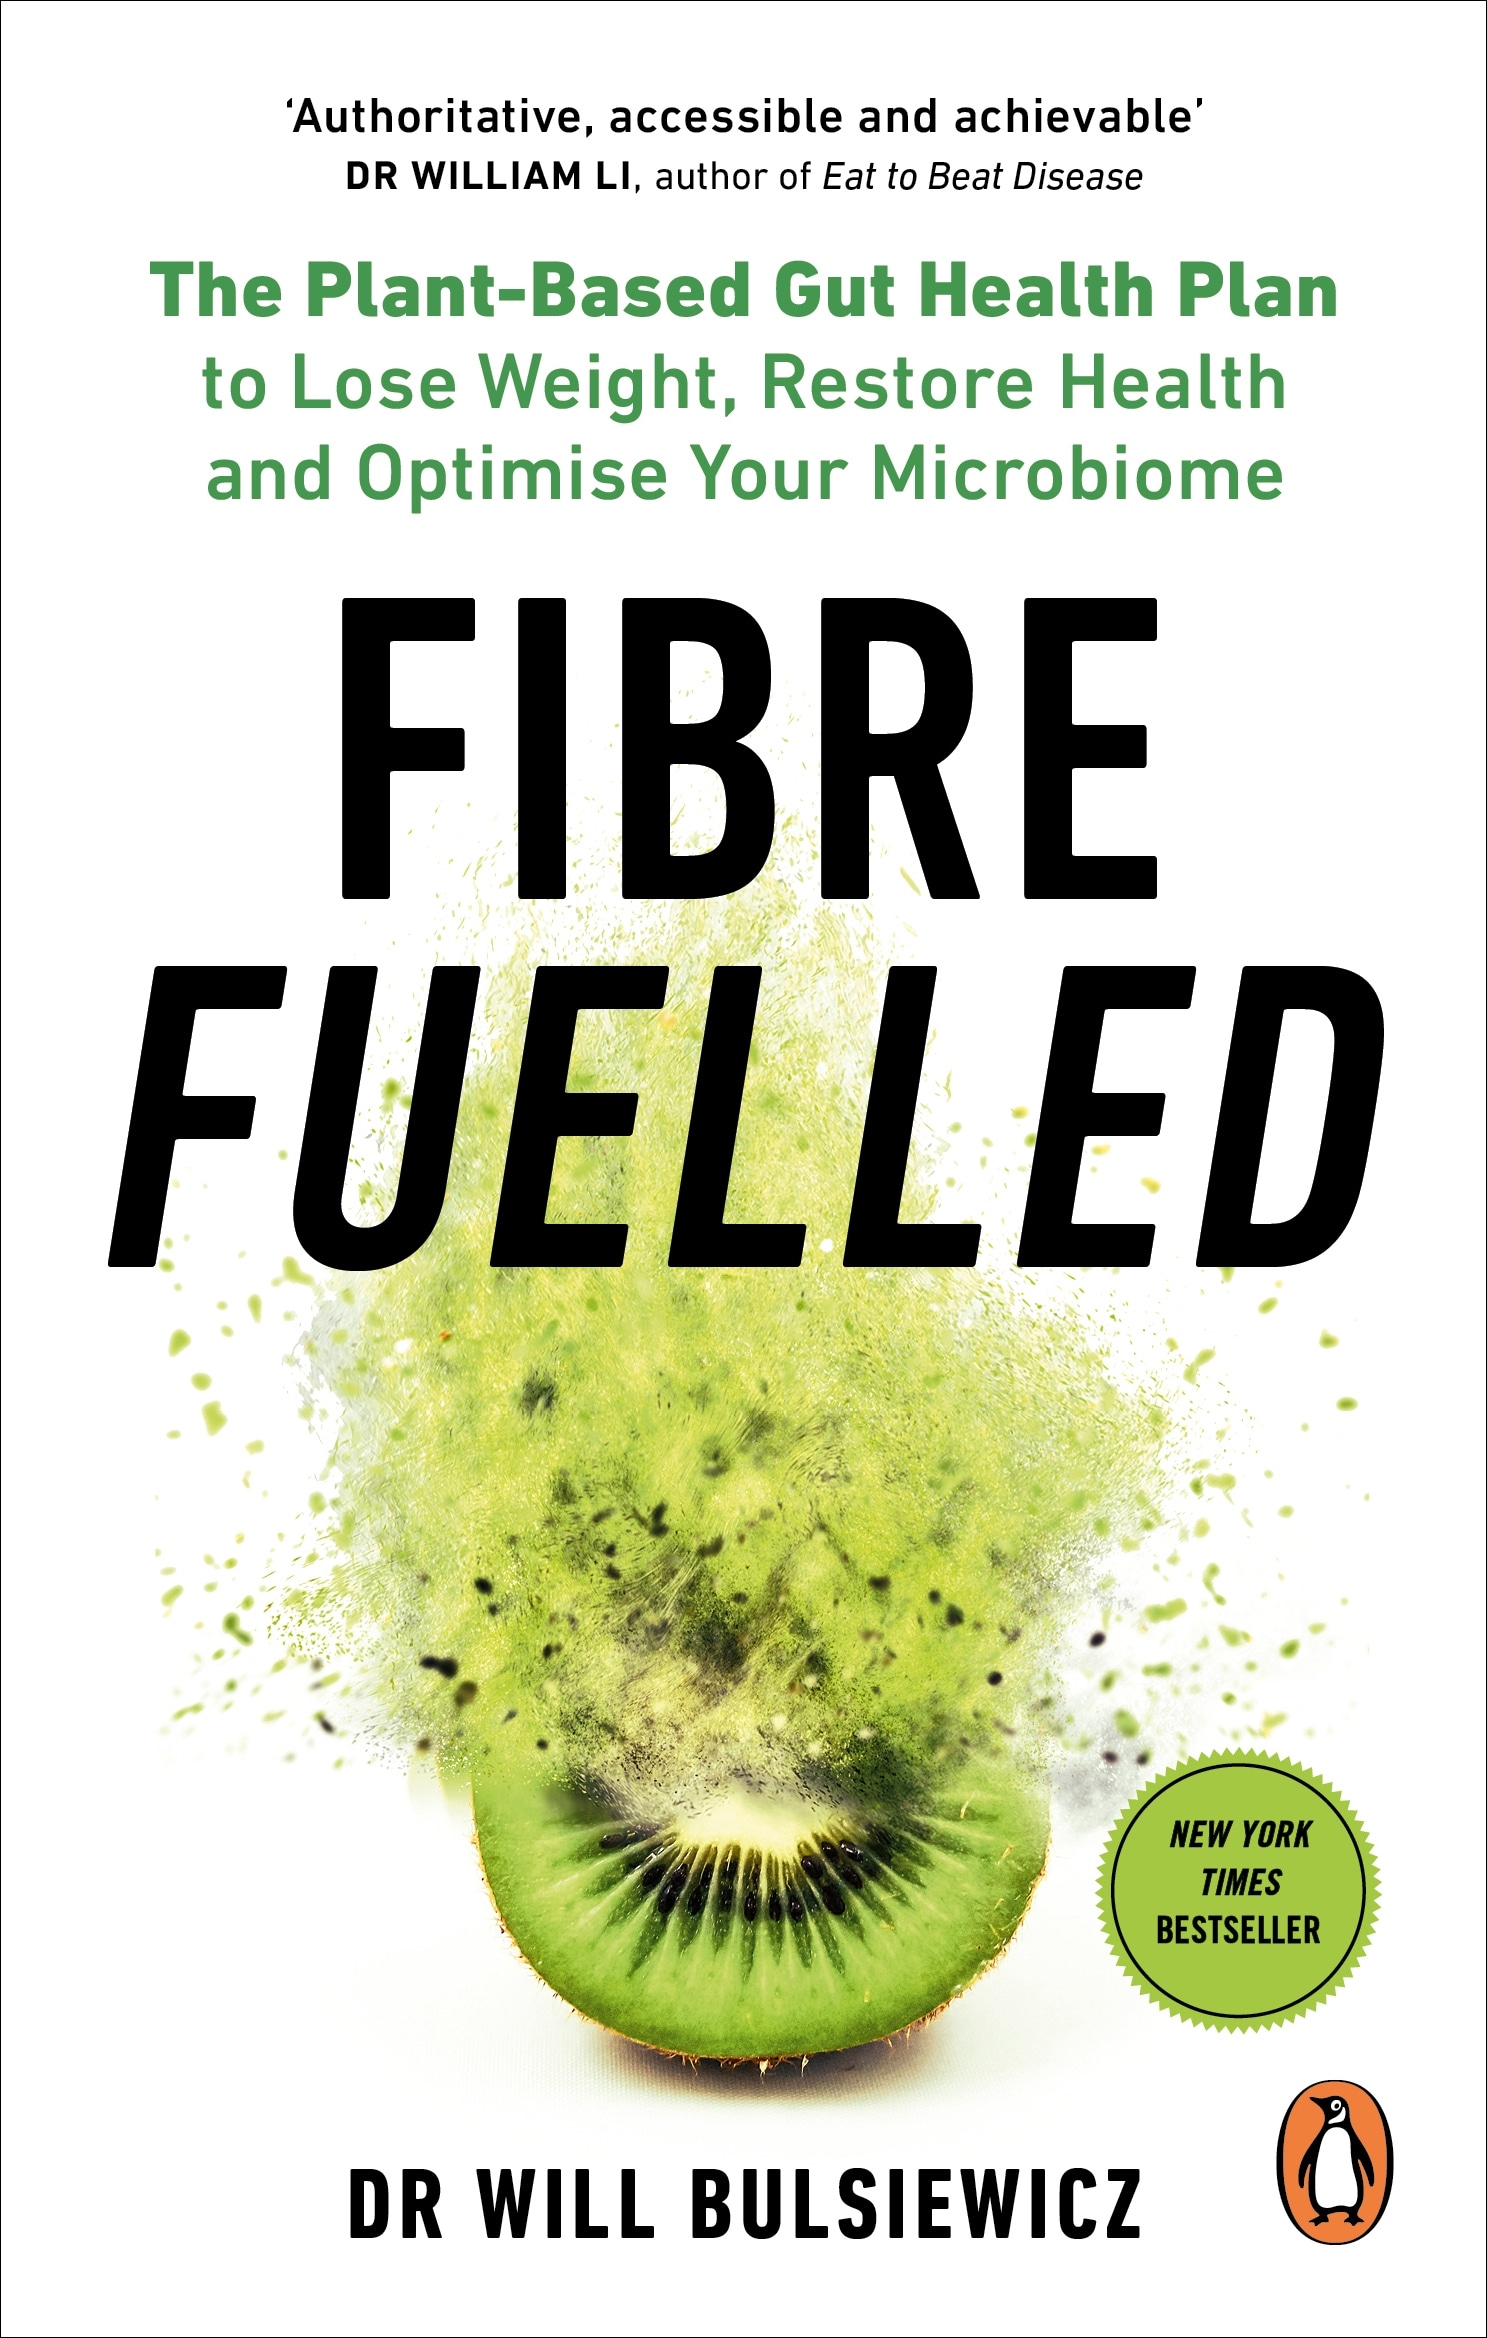 Book “Fibre Fuelled” by Will Bulsiewicz — March 24, 2022